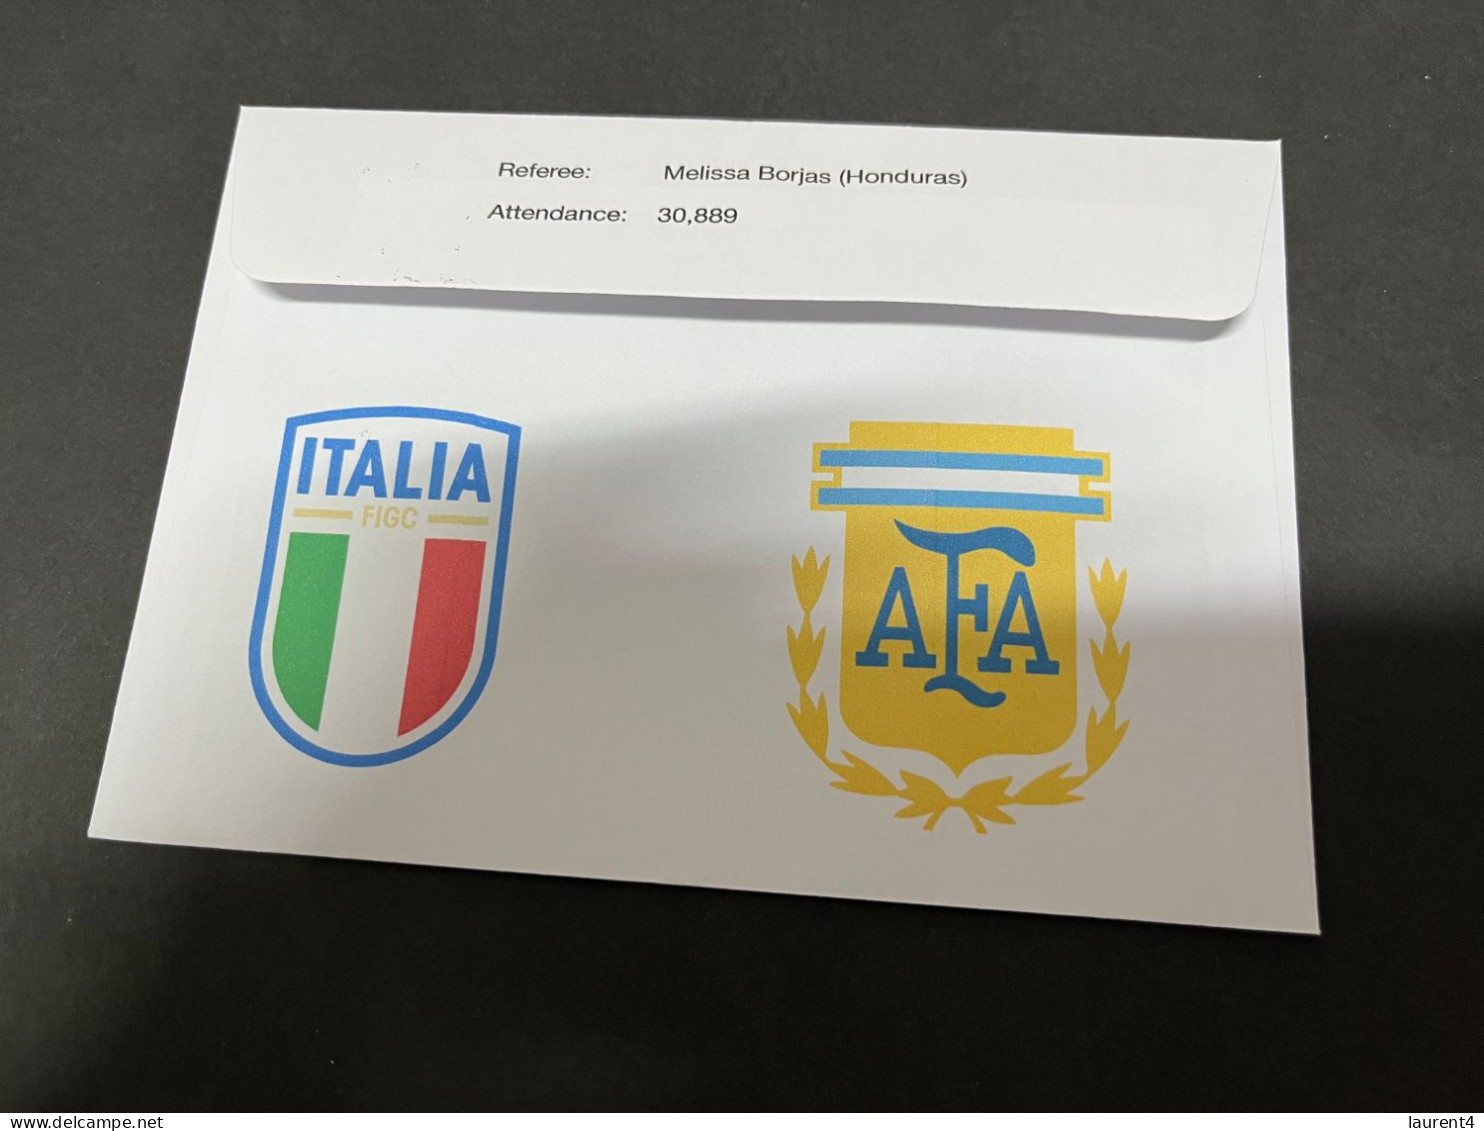 24-7-2023 (3 S 23) FIFA Women's Football World Cup Match 14 (stamp + Coin) Italy (1) V Argentina (0) - Dollar